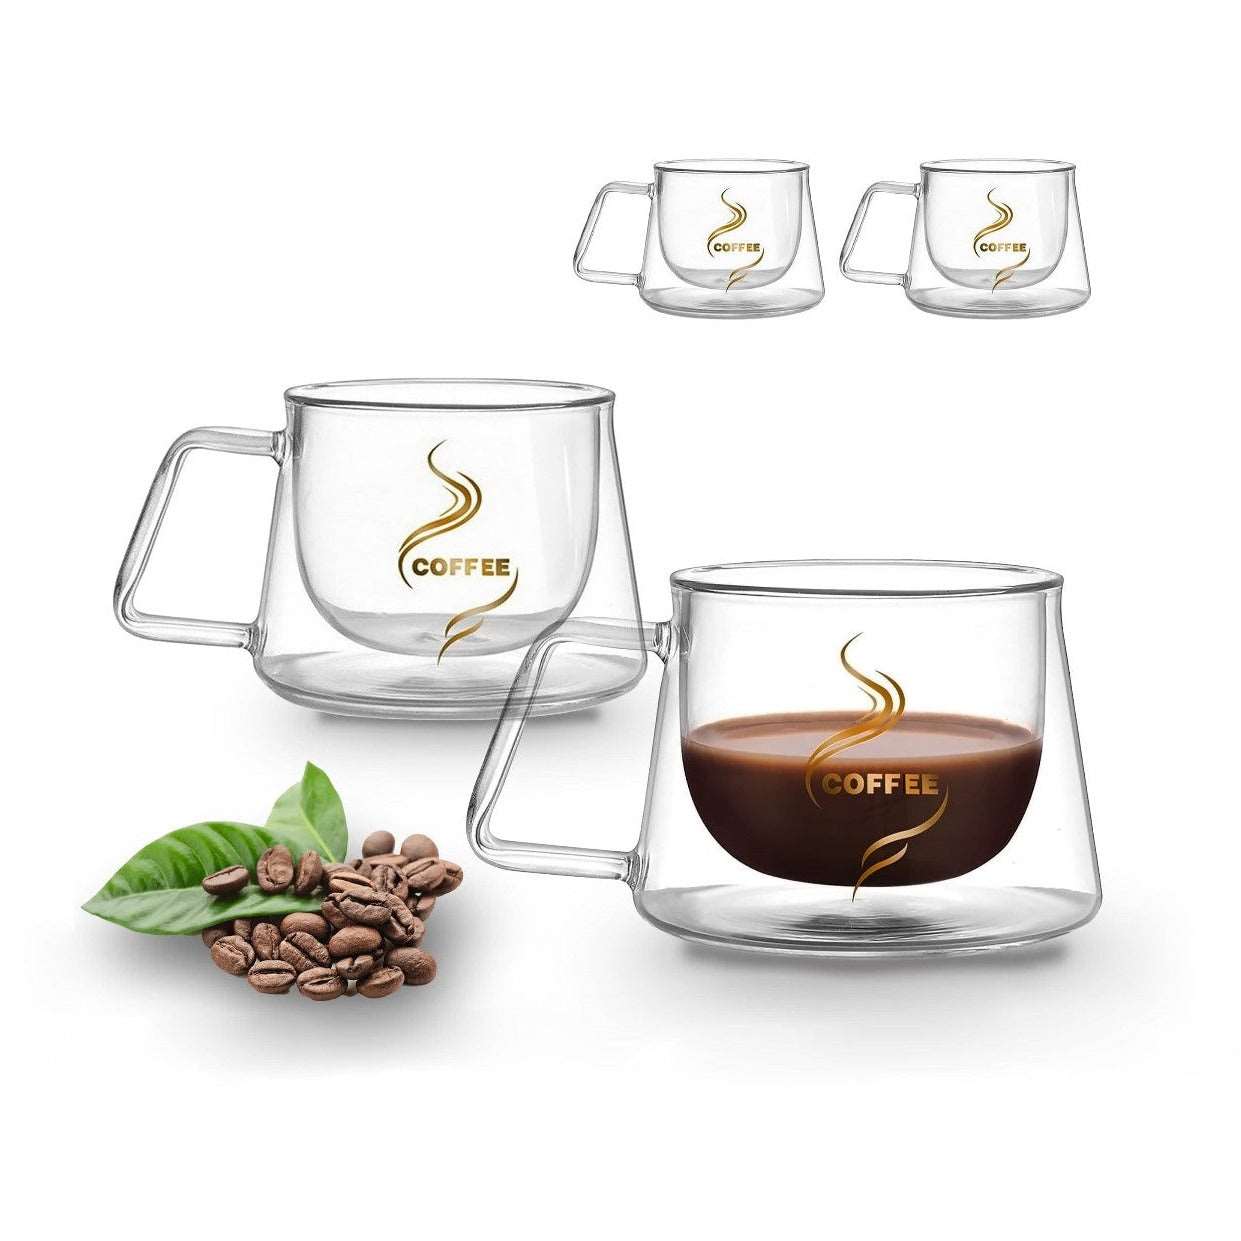 Coffee Mugs Double Wall Glass Coffee Mugs - Espresso Shot Cup Set, Iced Coffee Glasses - Insulated Clear Cups